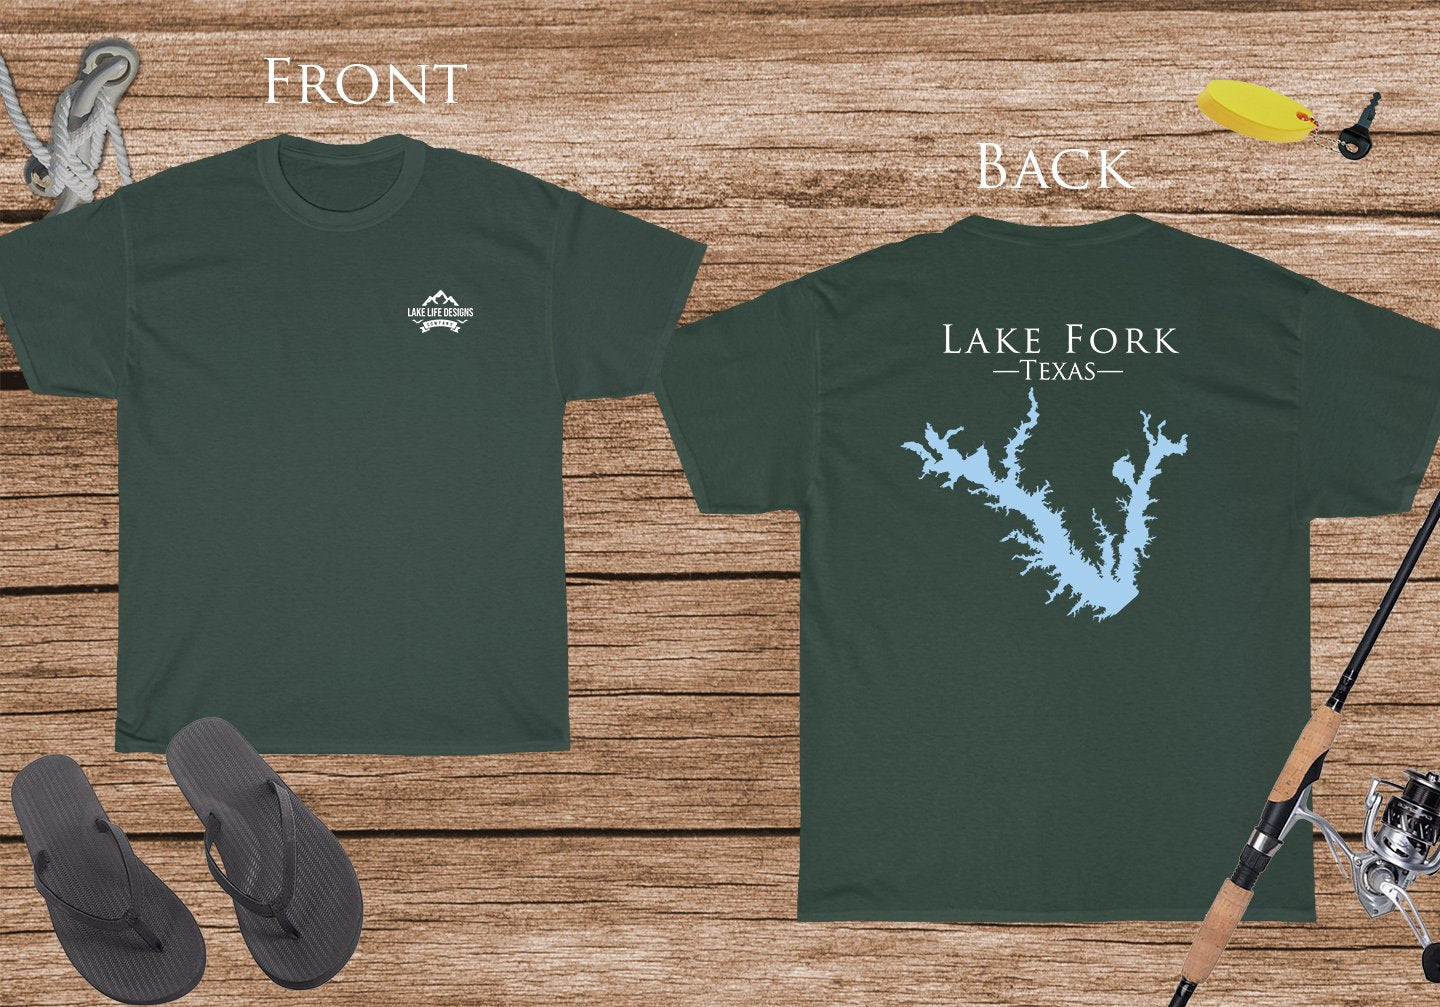 Lake Fork Texas - Cotton Short Sleeved - FRONT & BACK PRINTED - Short Sleeved Cotton Tee - Texas Lake